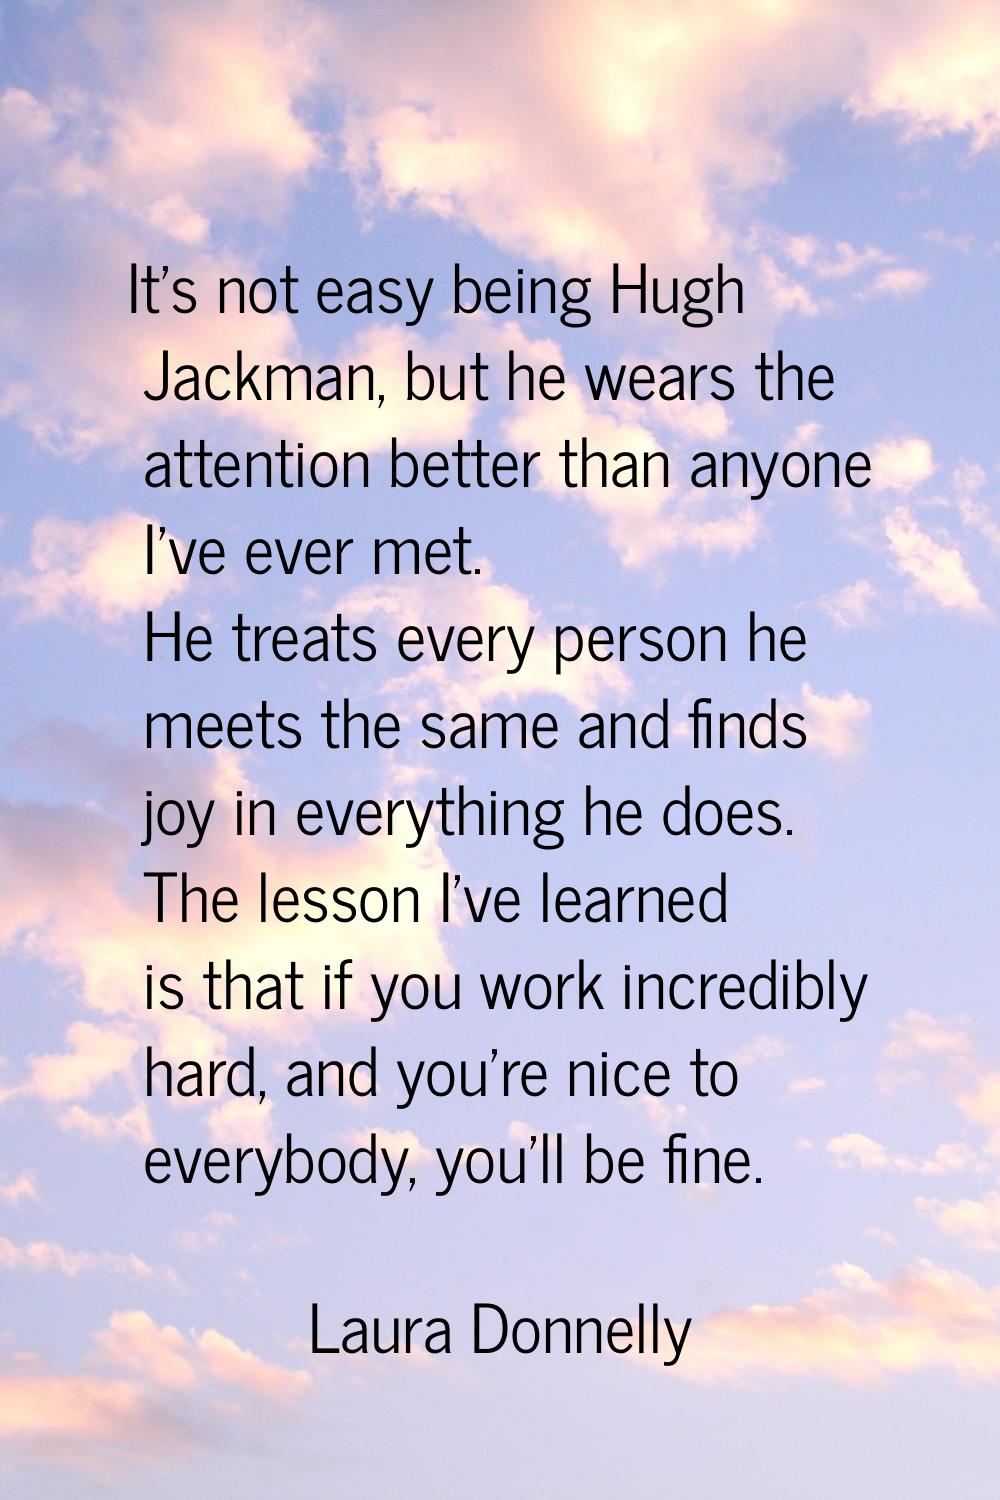 It's not easy being Hugh Jackman, but he wears the attention better than anyone I've ever met. He t